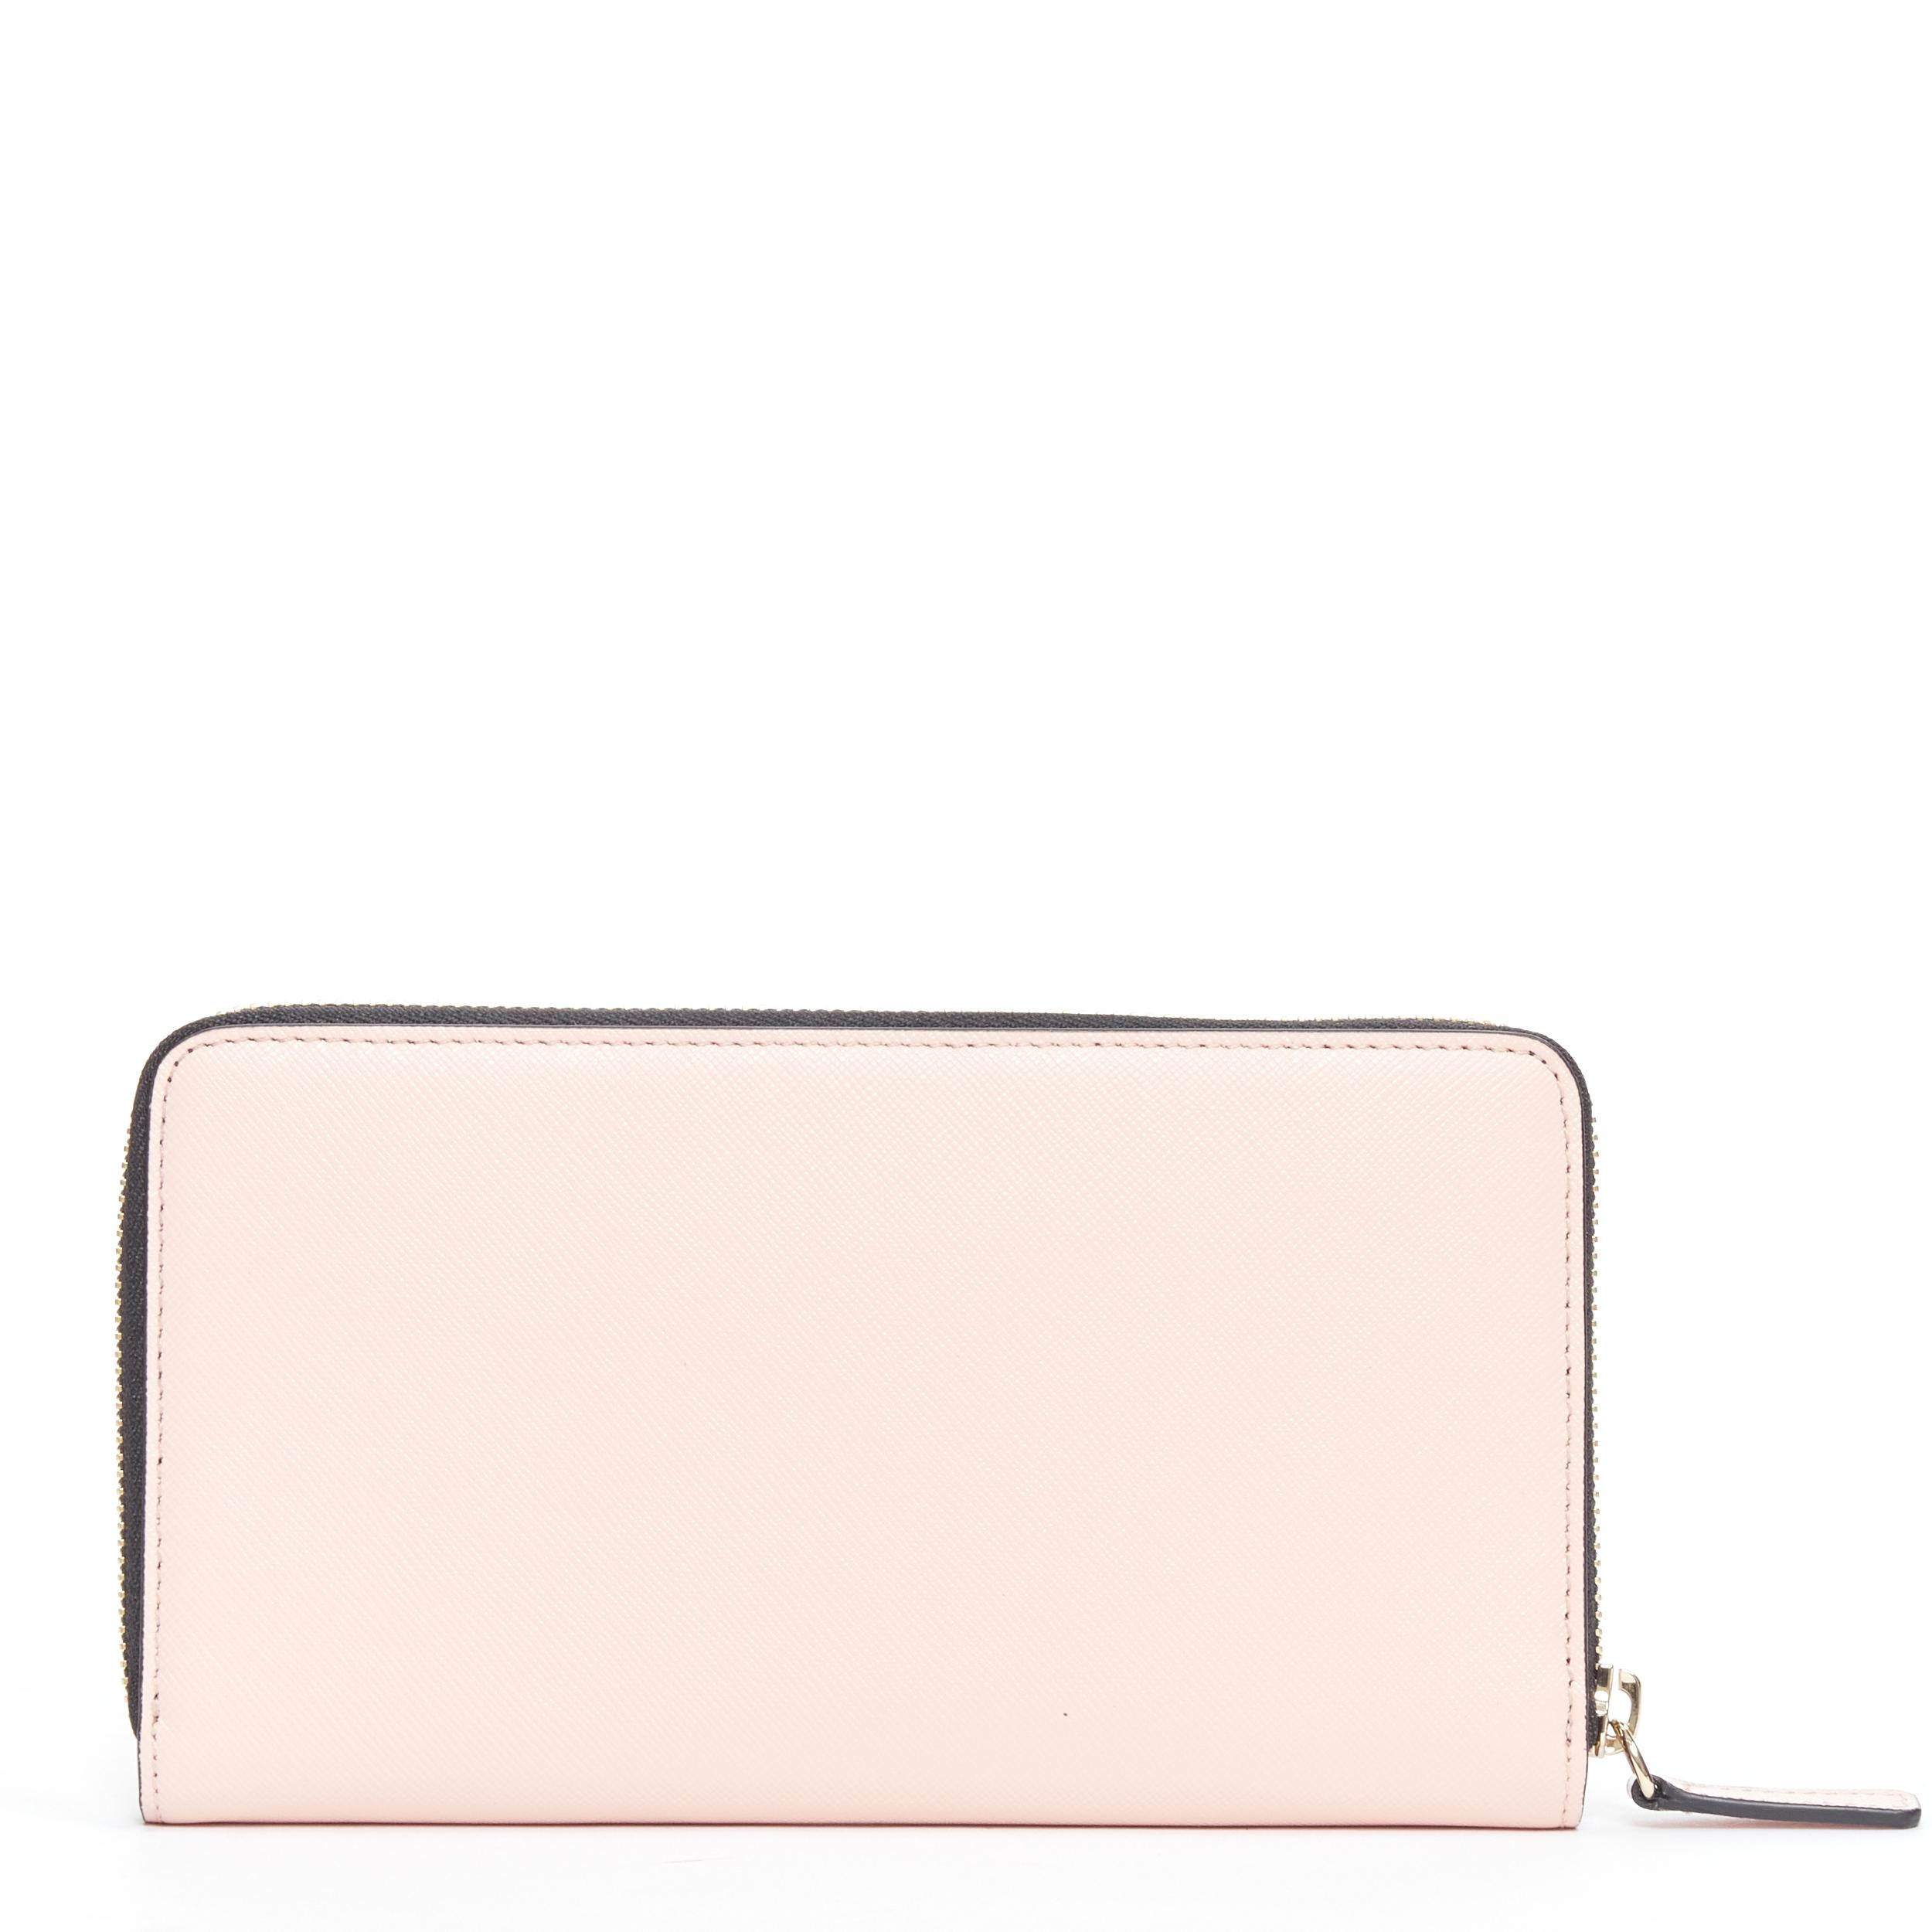 light pink wallet icon